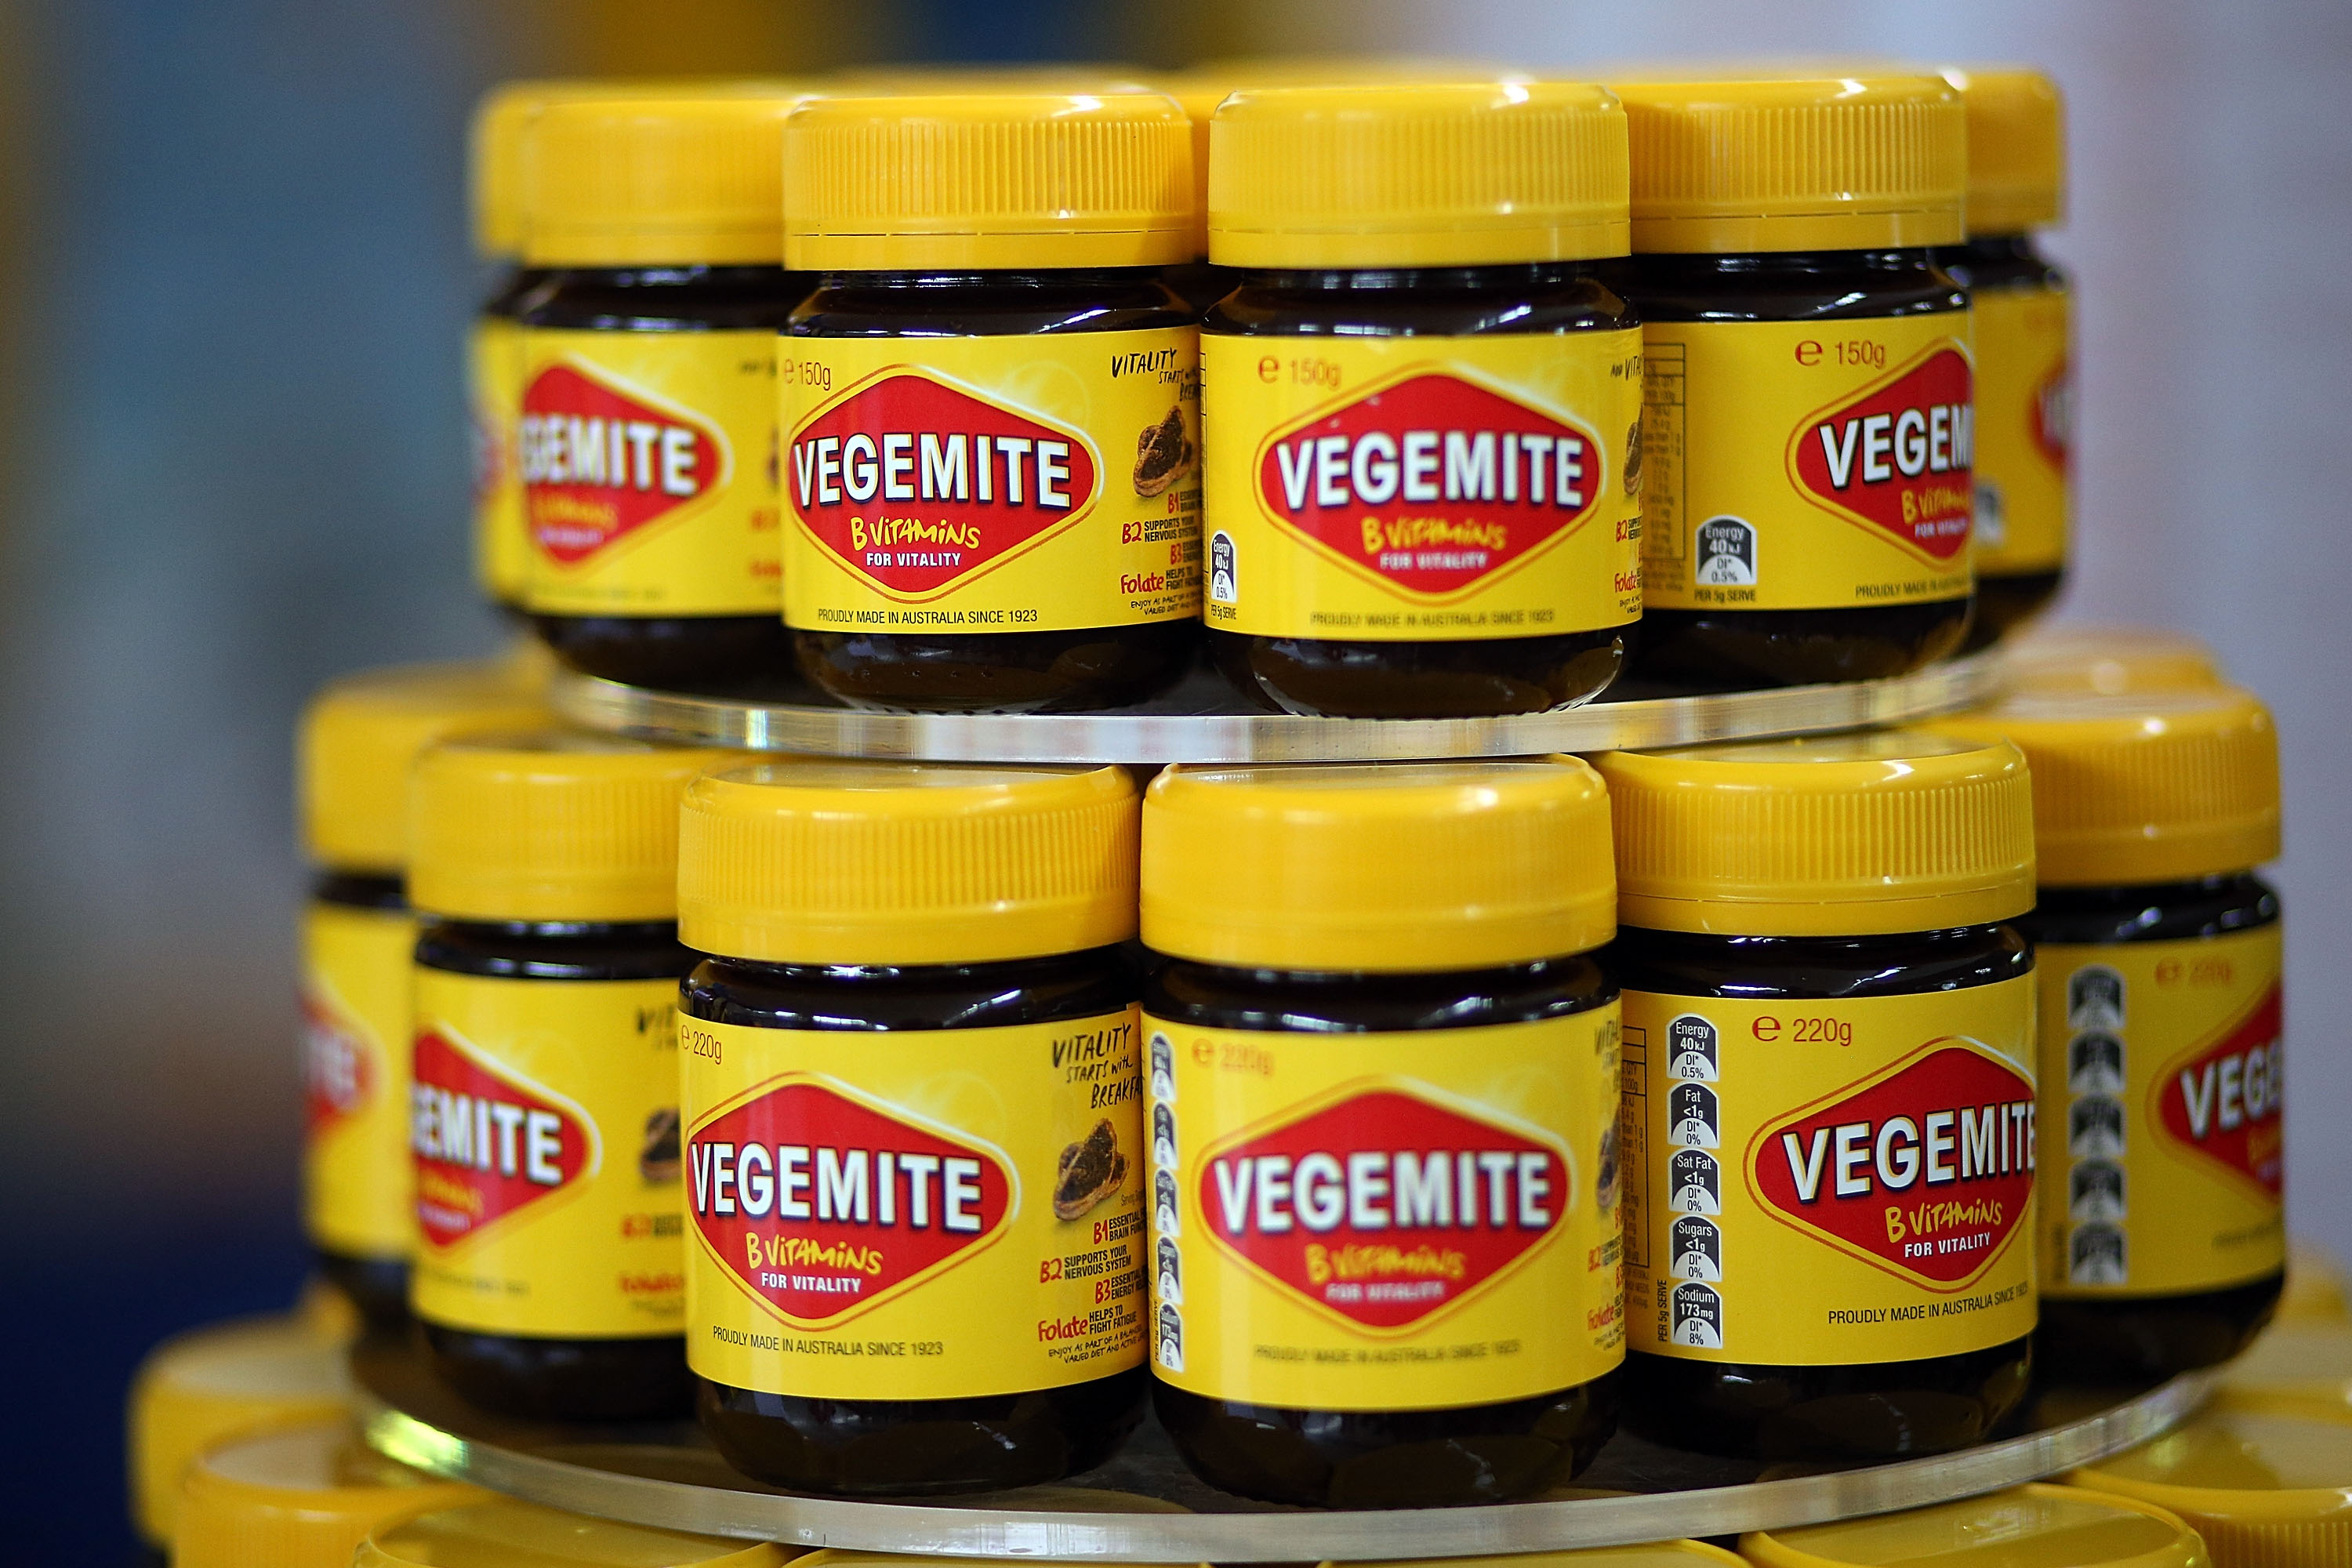 Jars of Vegemite are seen during a press call to celebrate the Vegemite brand's 90th year at the Vegemite factory in Melbourne on Oct. 24, 2013. (Graham Denholm—Getty Images)